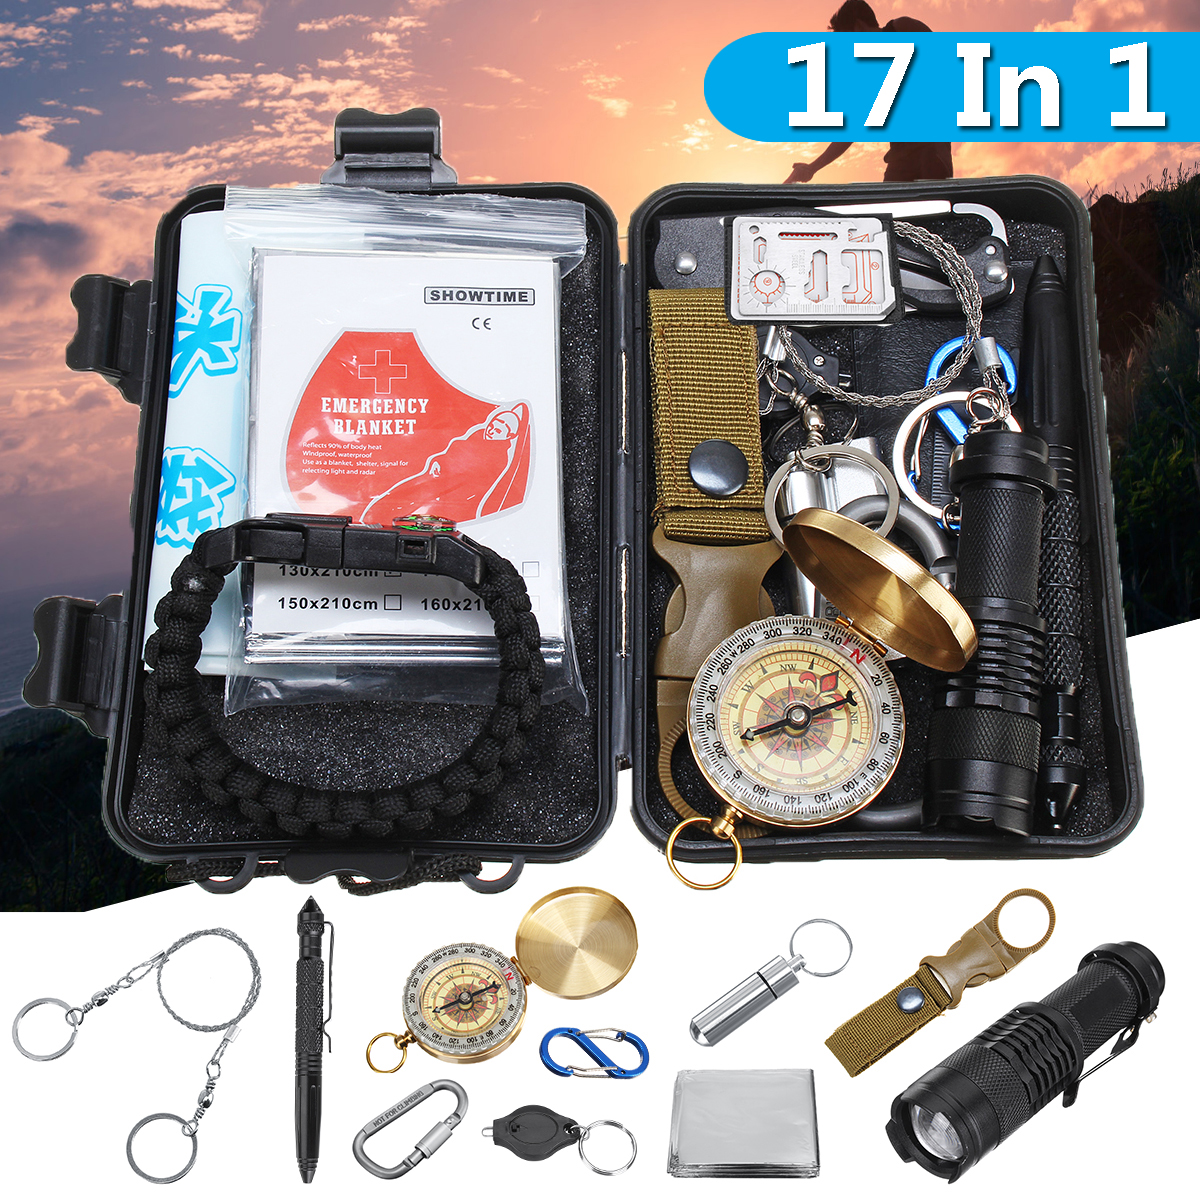 17-in-1-SOS-Emergency-Camping-Hiking-Hunting-Outdoor-Survival-Equipment-Tools-Kit-Gear-1411435-1